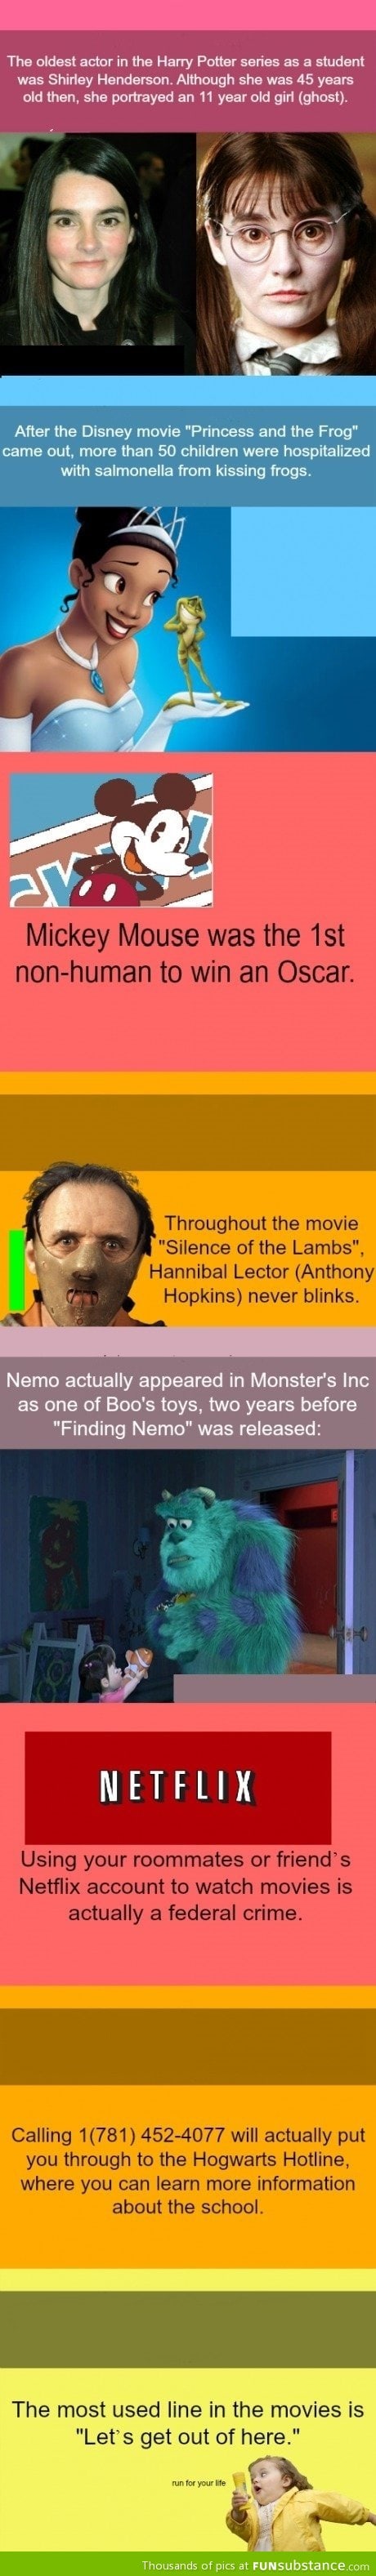 Some useless movie facts